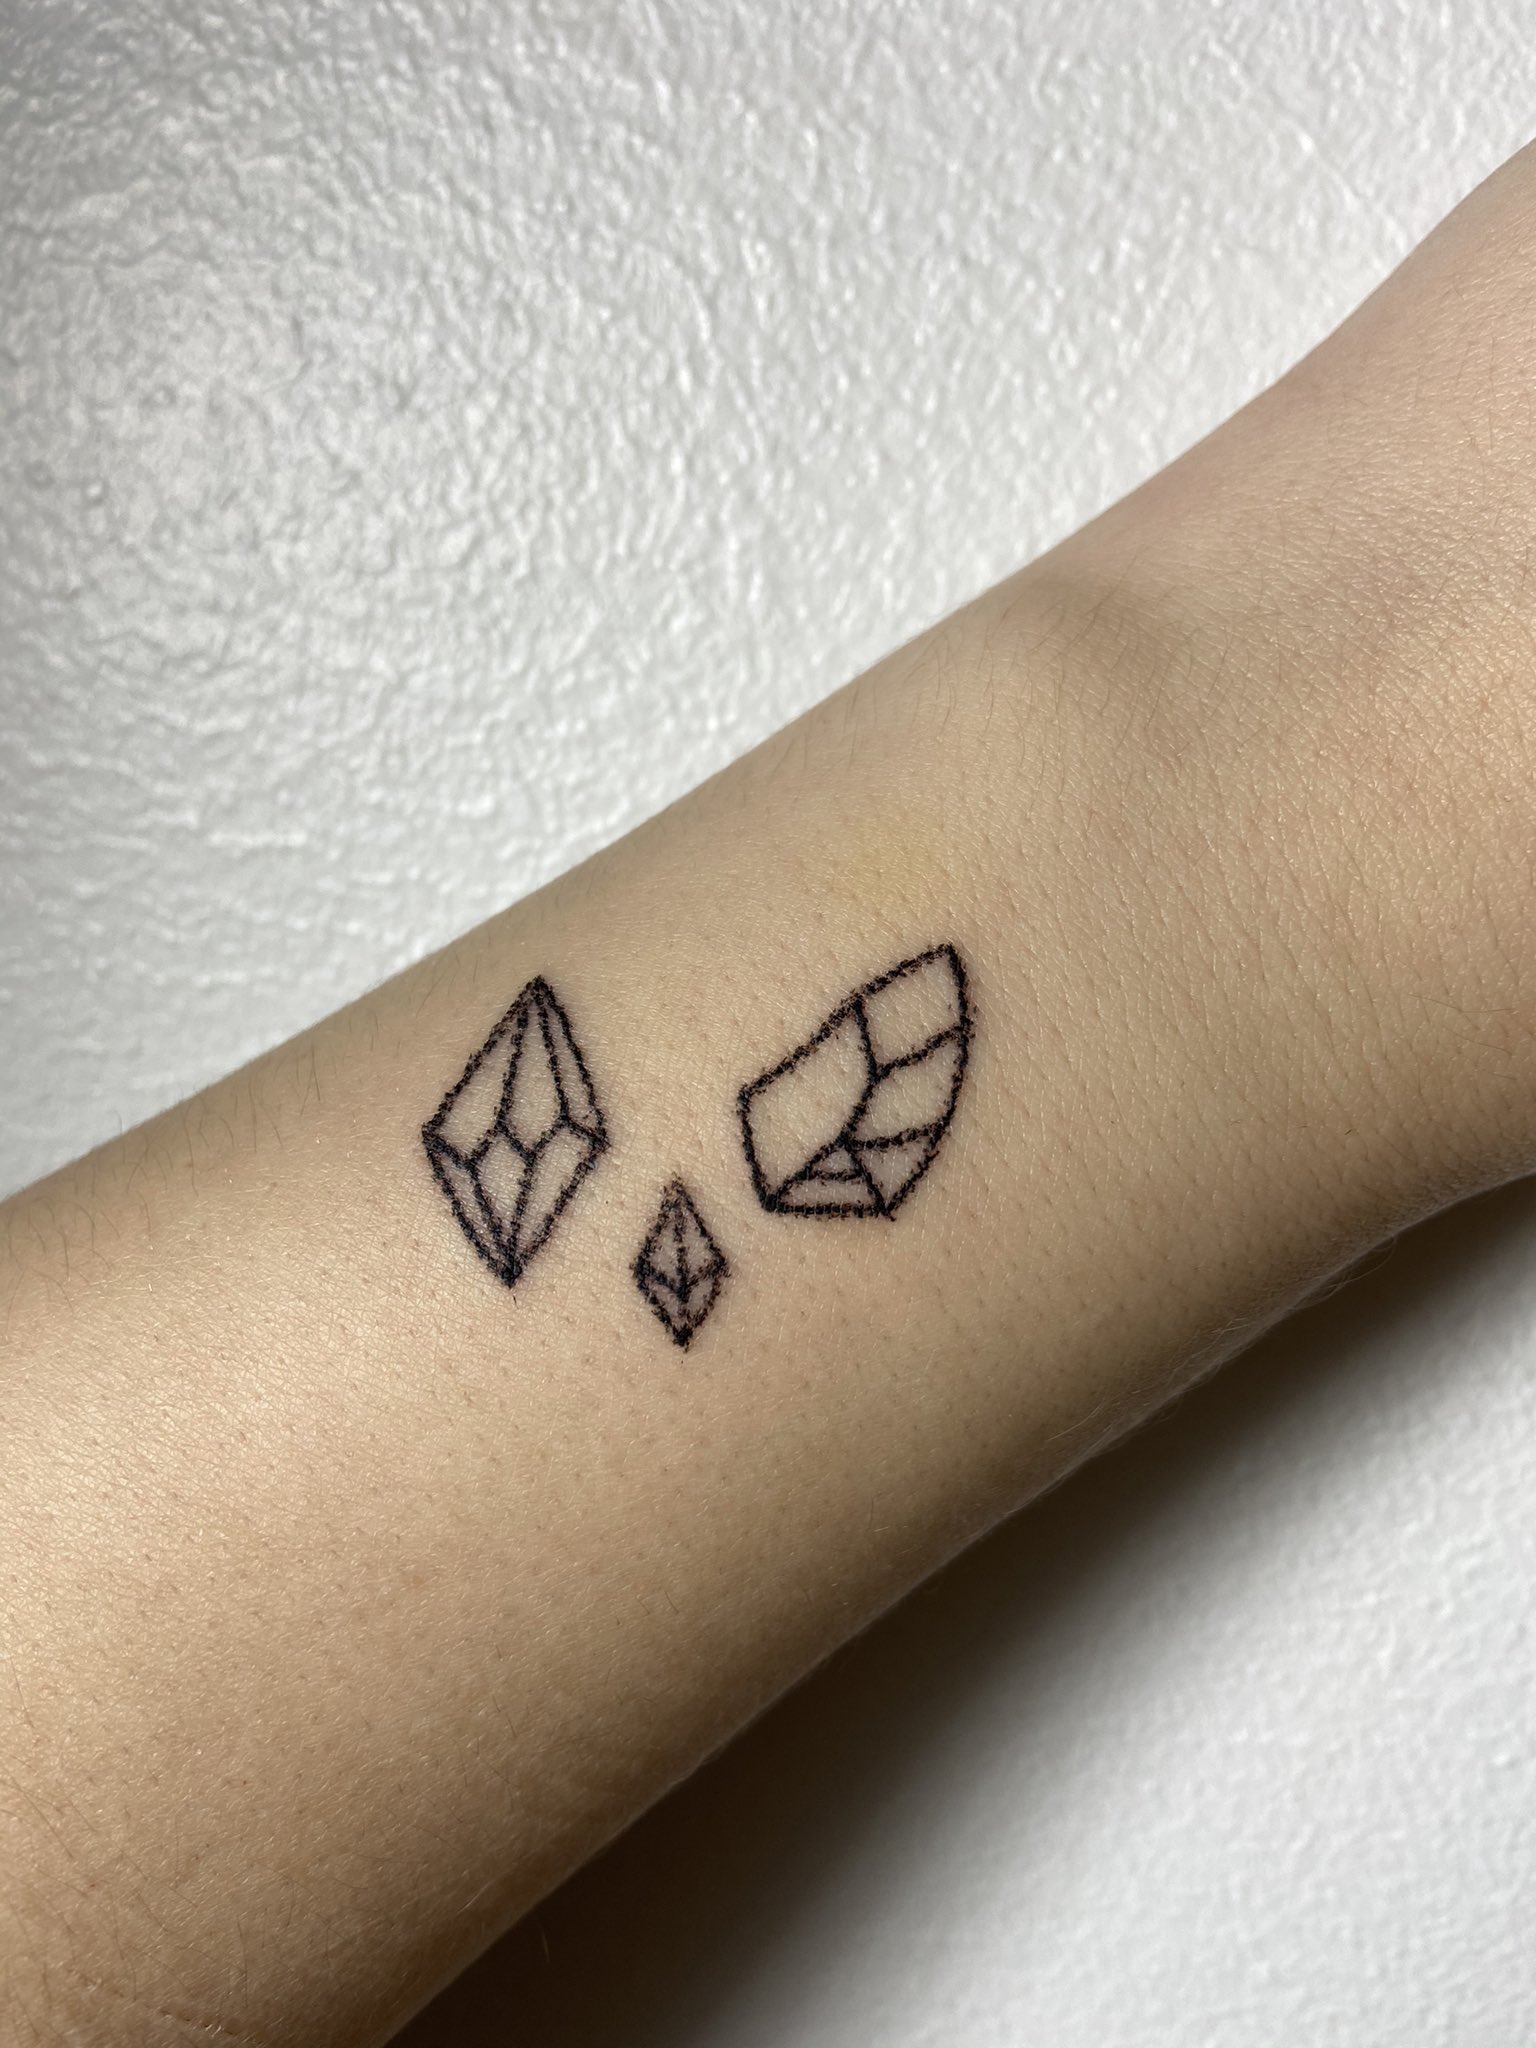 These Gorgeous Crystal Tattoos Will Definitely Test Your Willpower   TattooBlend